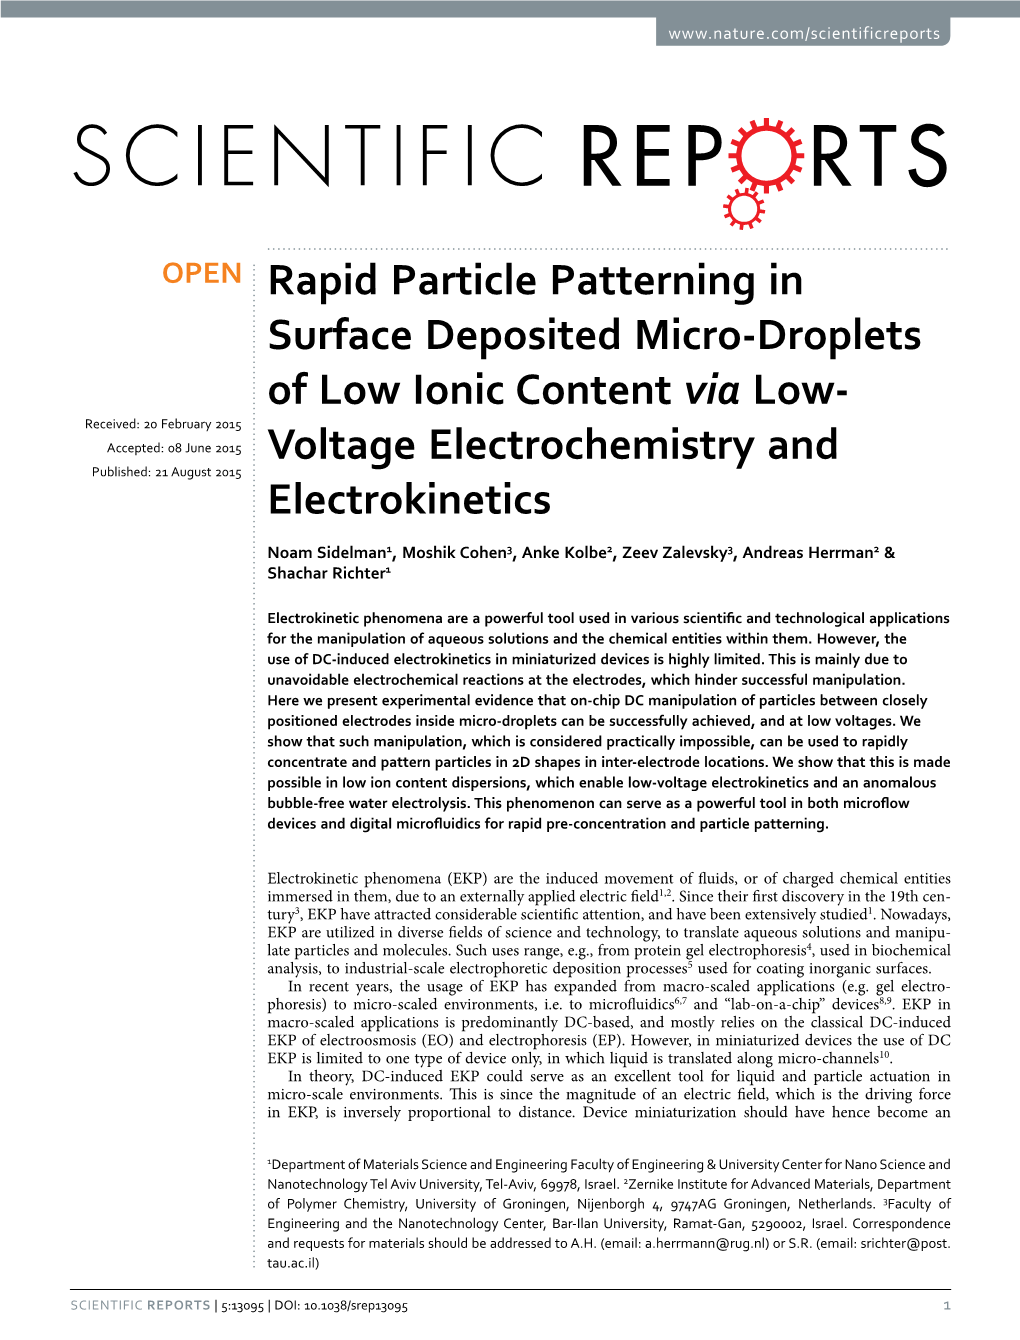 Rapid Particle Patterning in Surface Deposited Micro-Droplets of Low